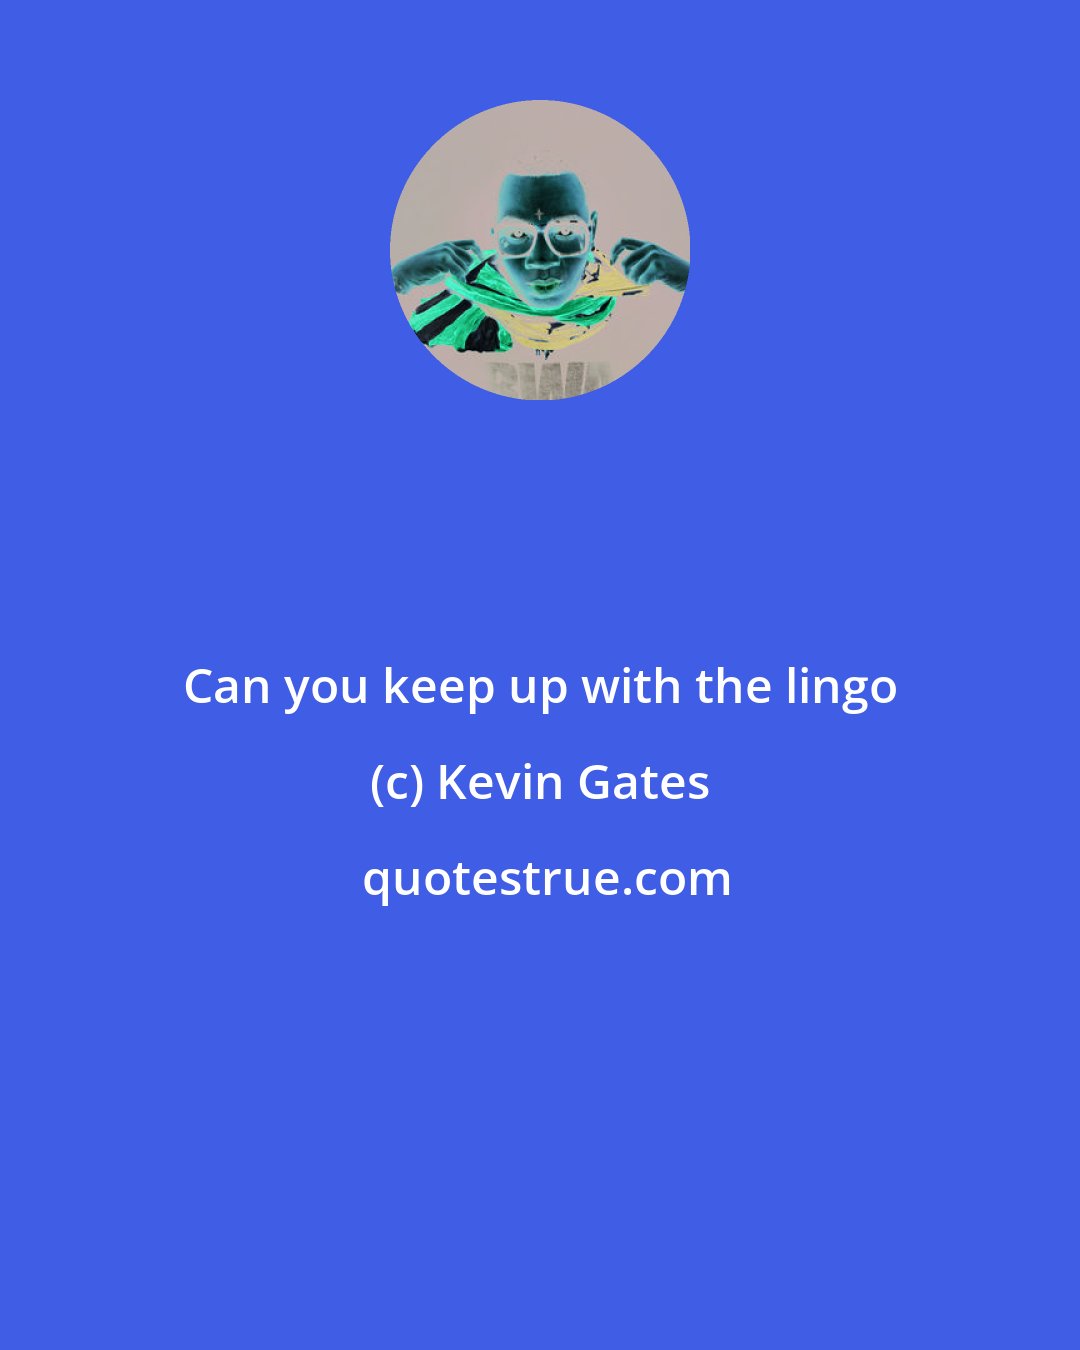 Kevin Gates: Can you keep up with the lingo